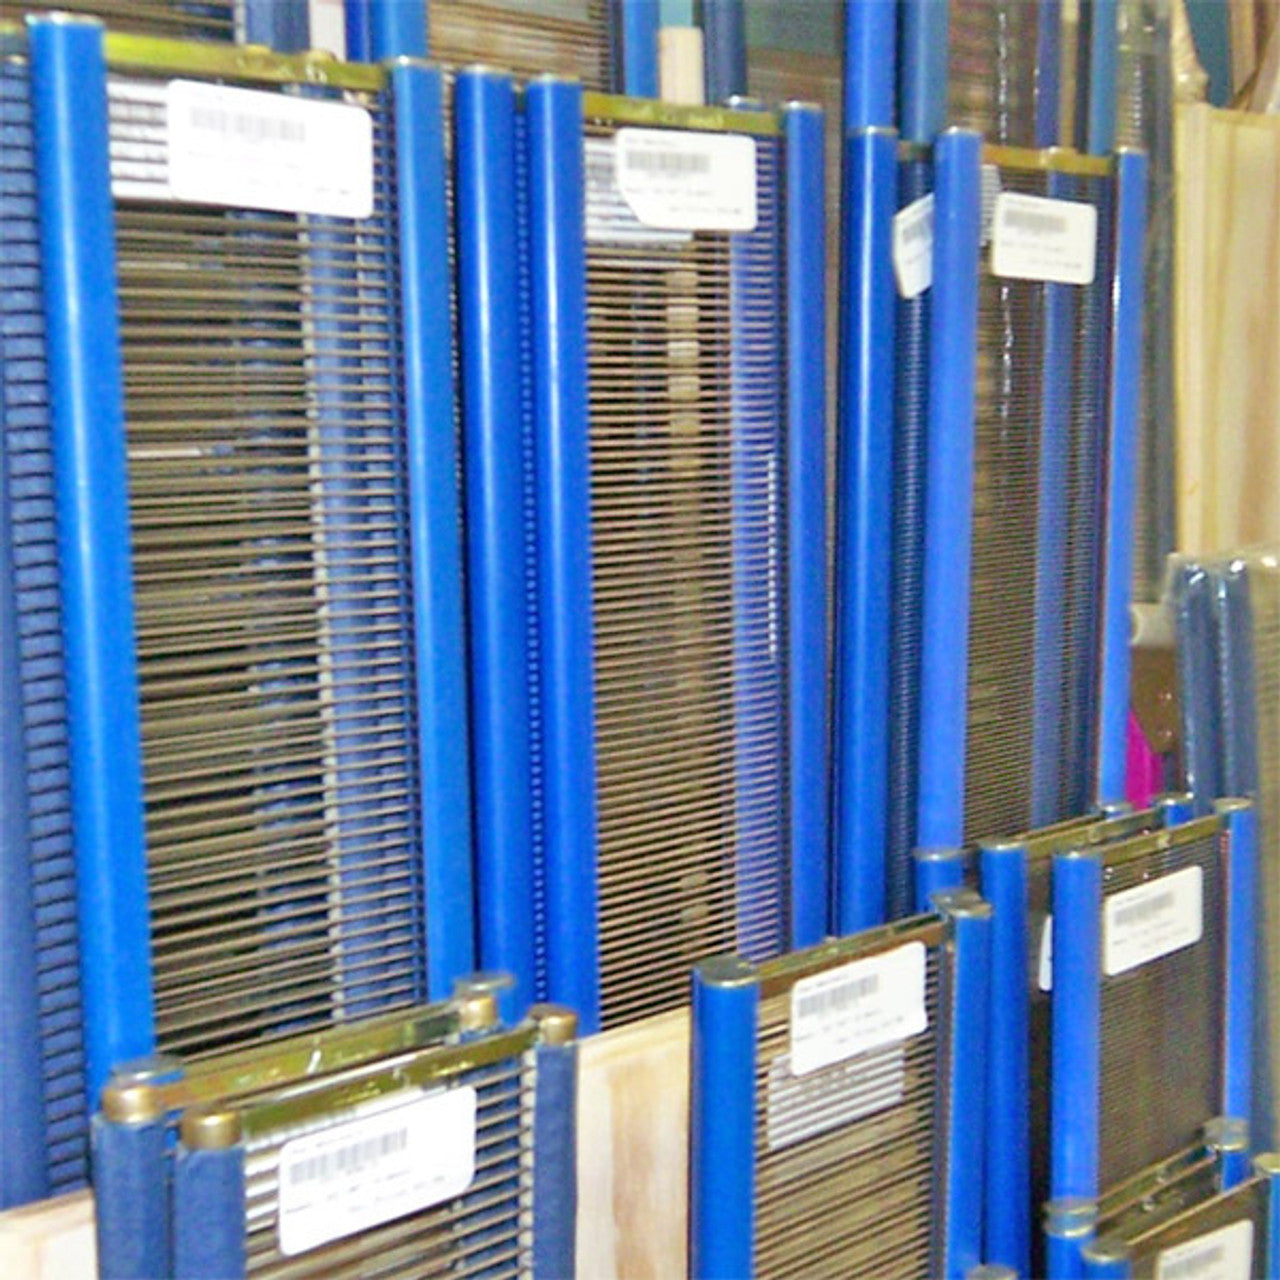 Stainless Steel Weaving Reeds | Leclerc